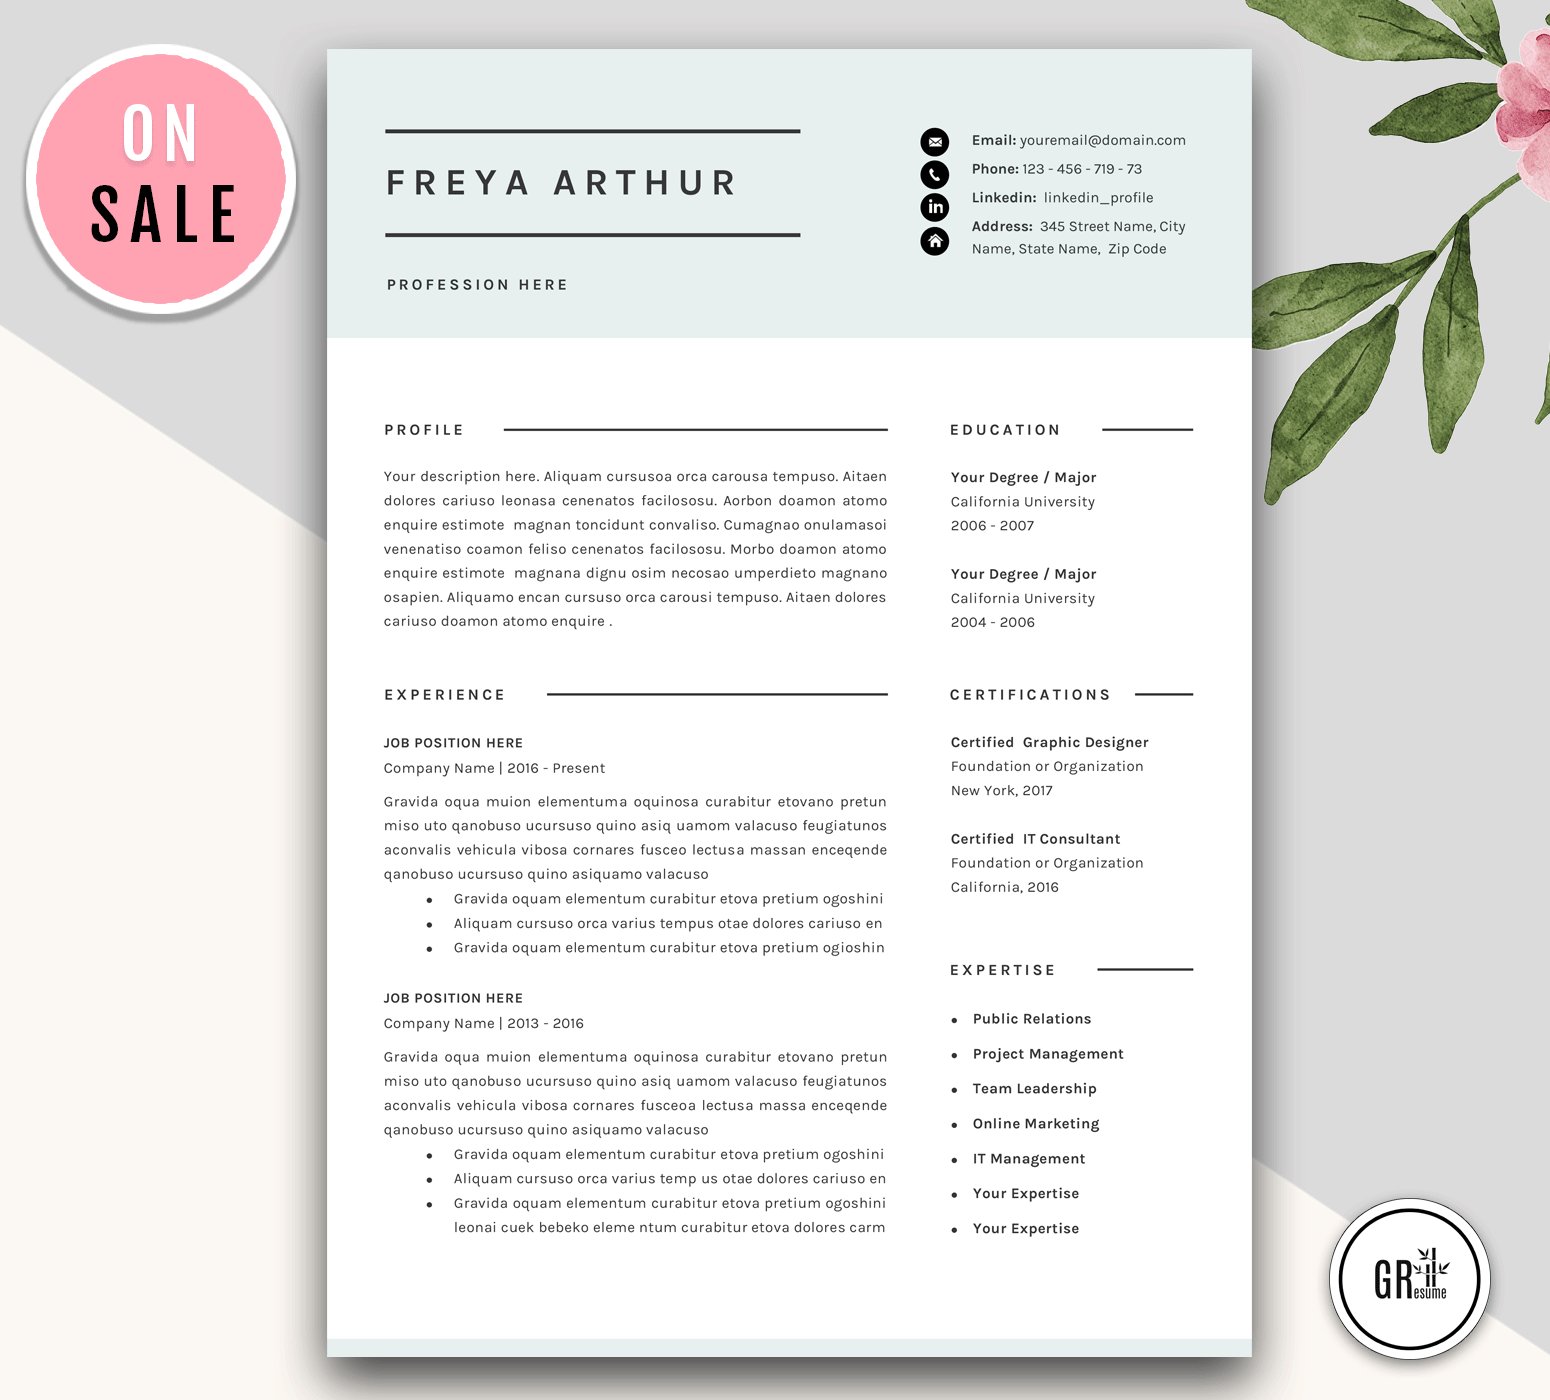 Professional CV Resume Templates cover image.